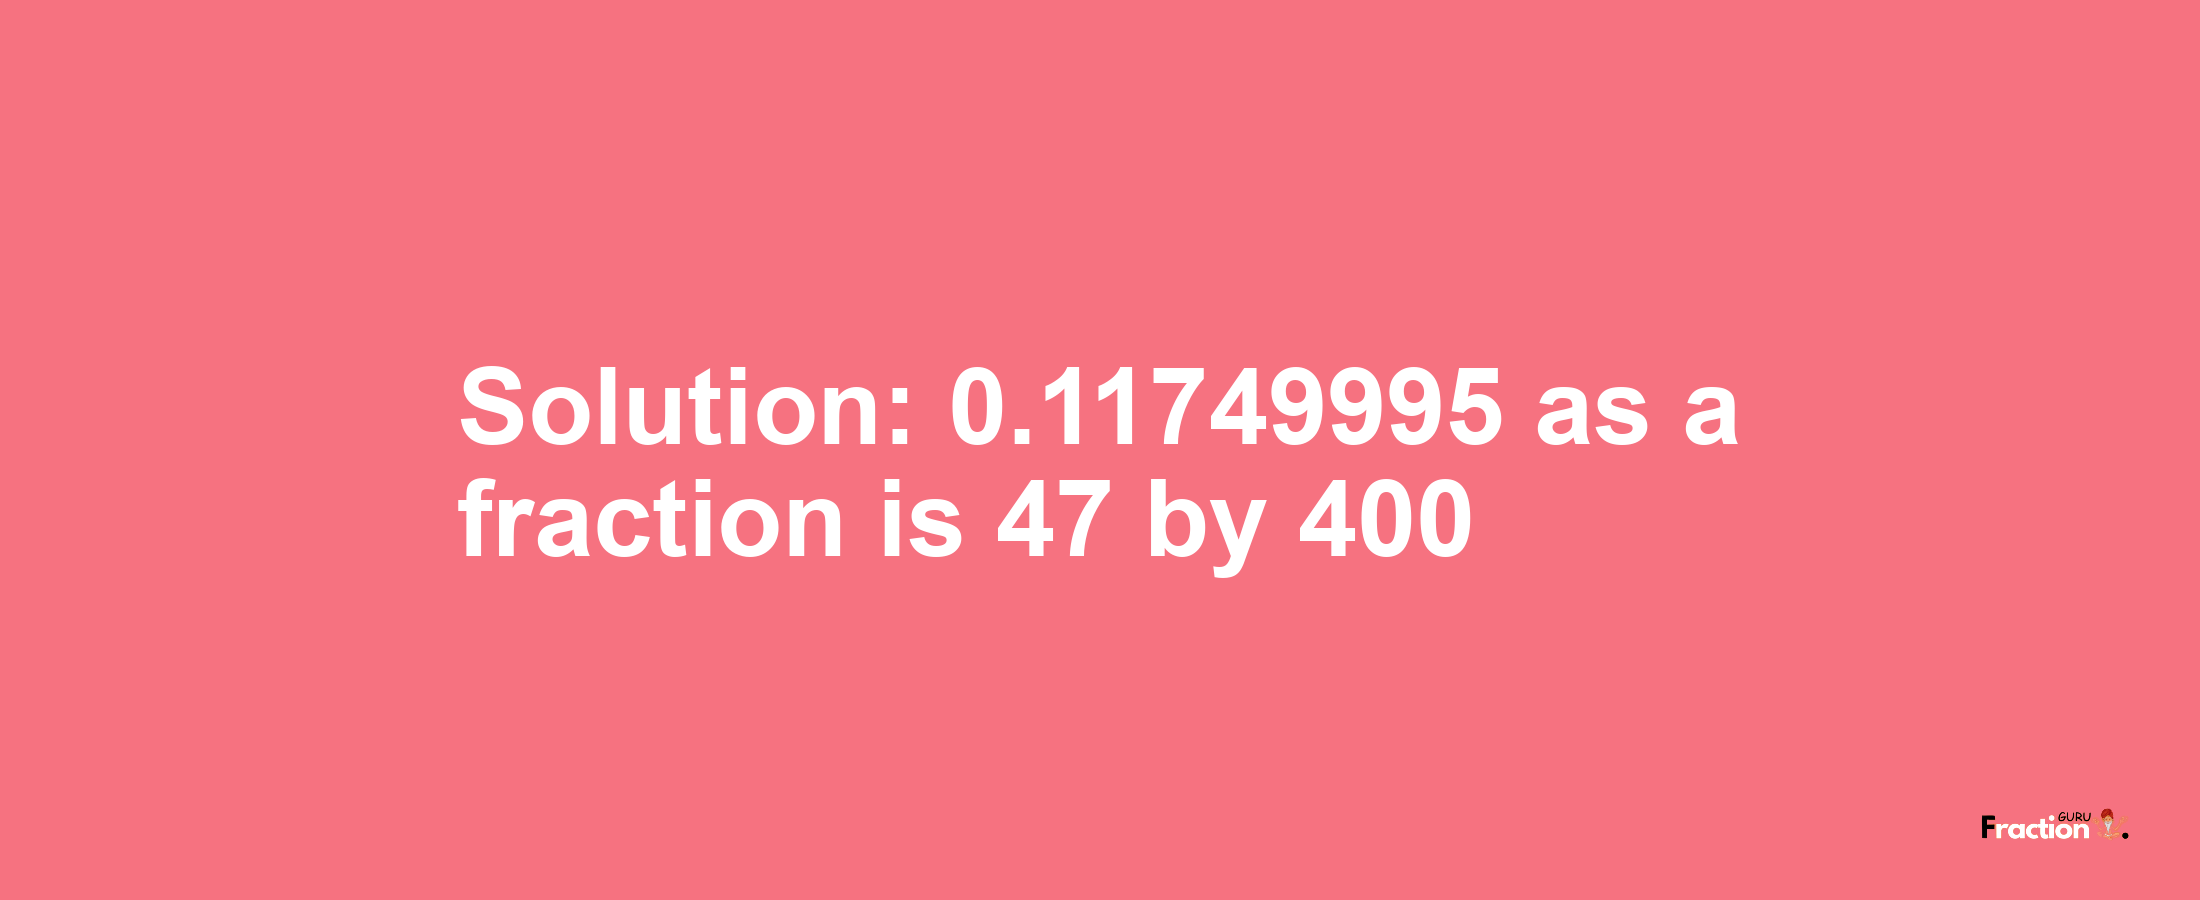 Solution:0.11749995 as a fraction is 47/400